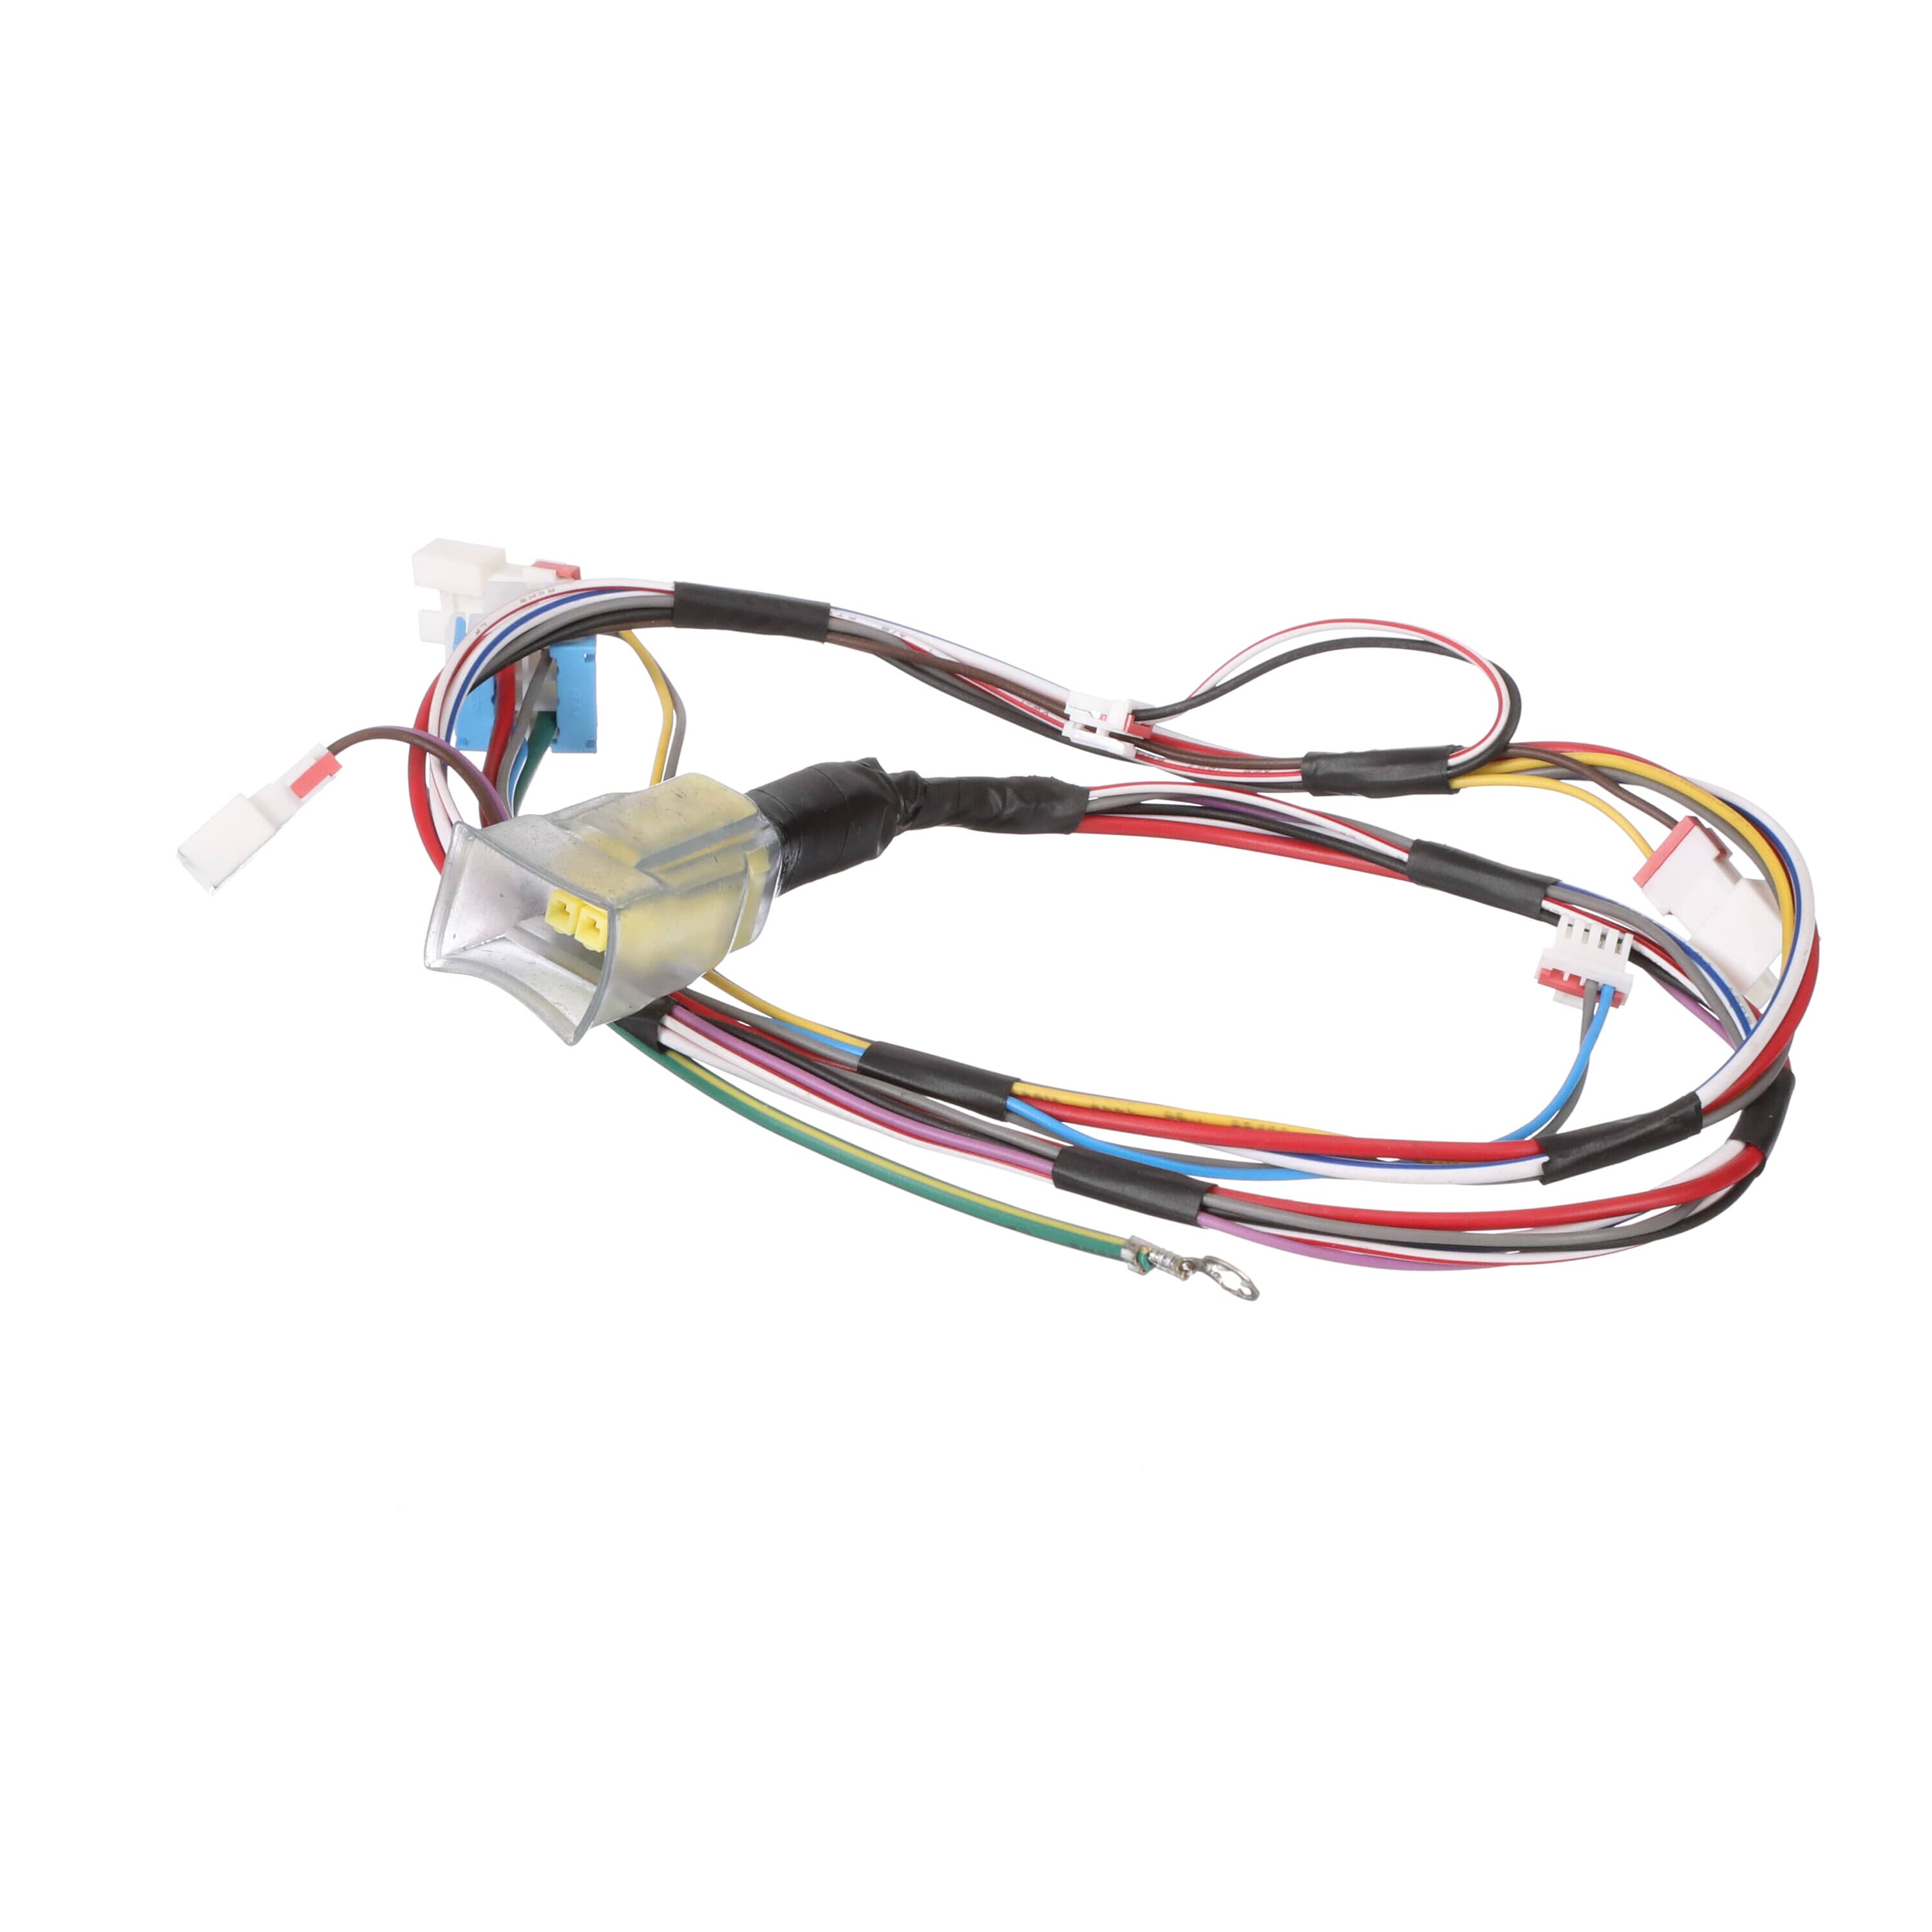 DA96-00962C ASSEMBLY WIRE HARNESS-TOP - Samsung Parts USA